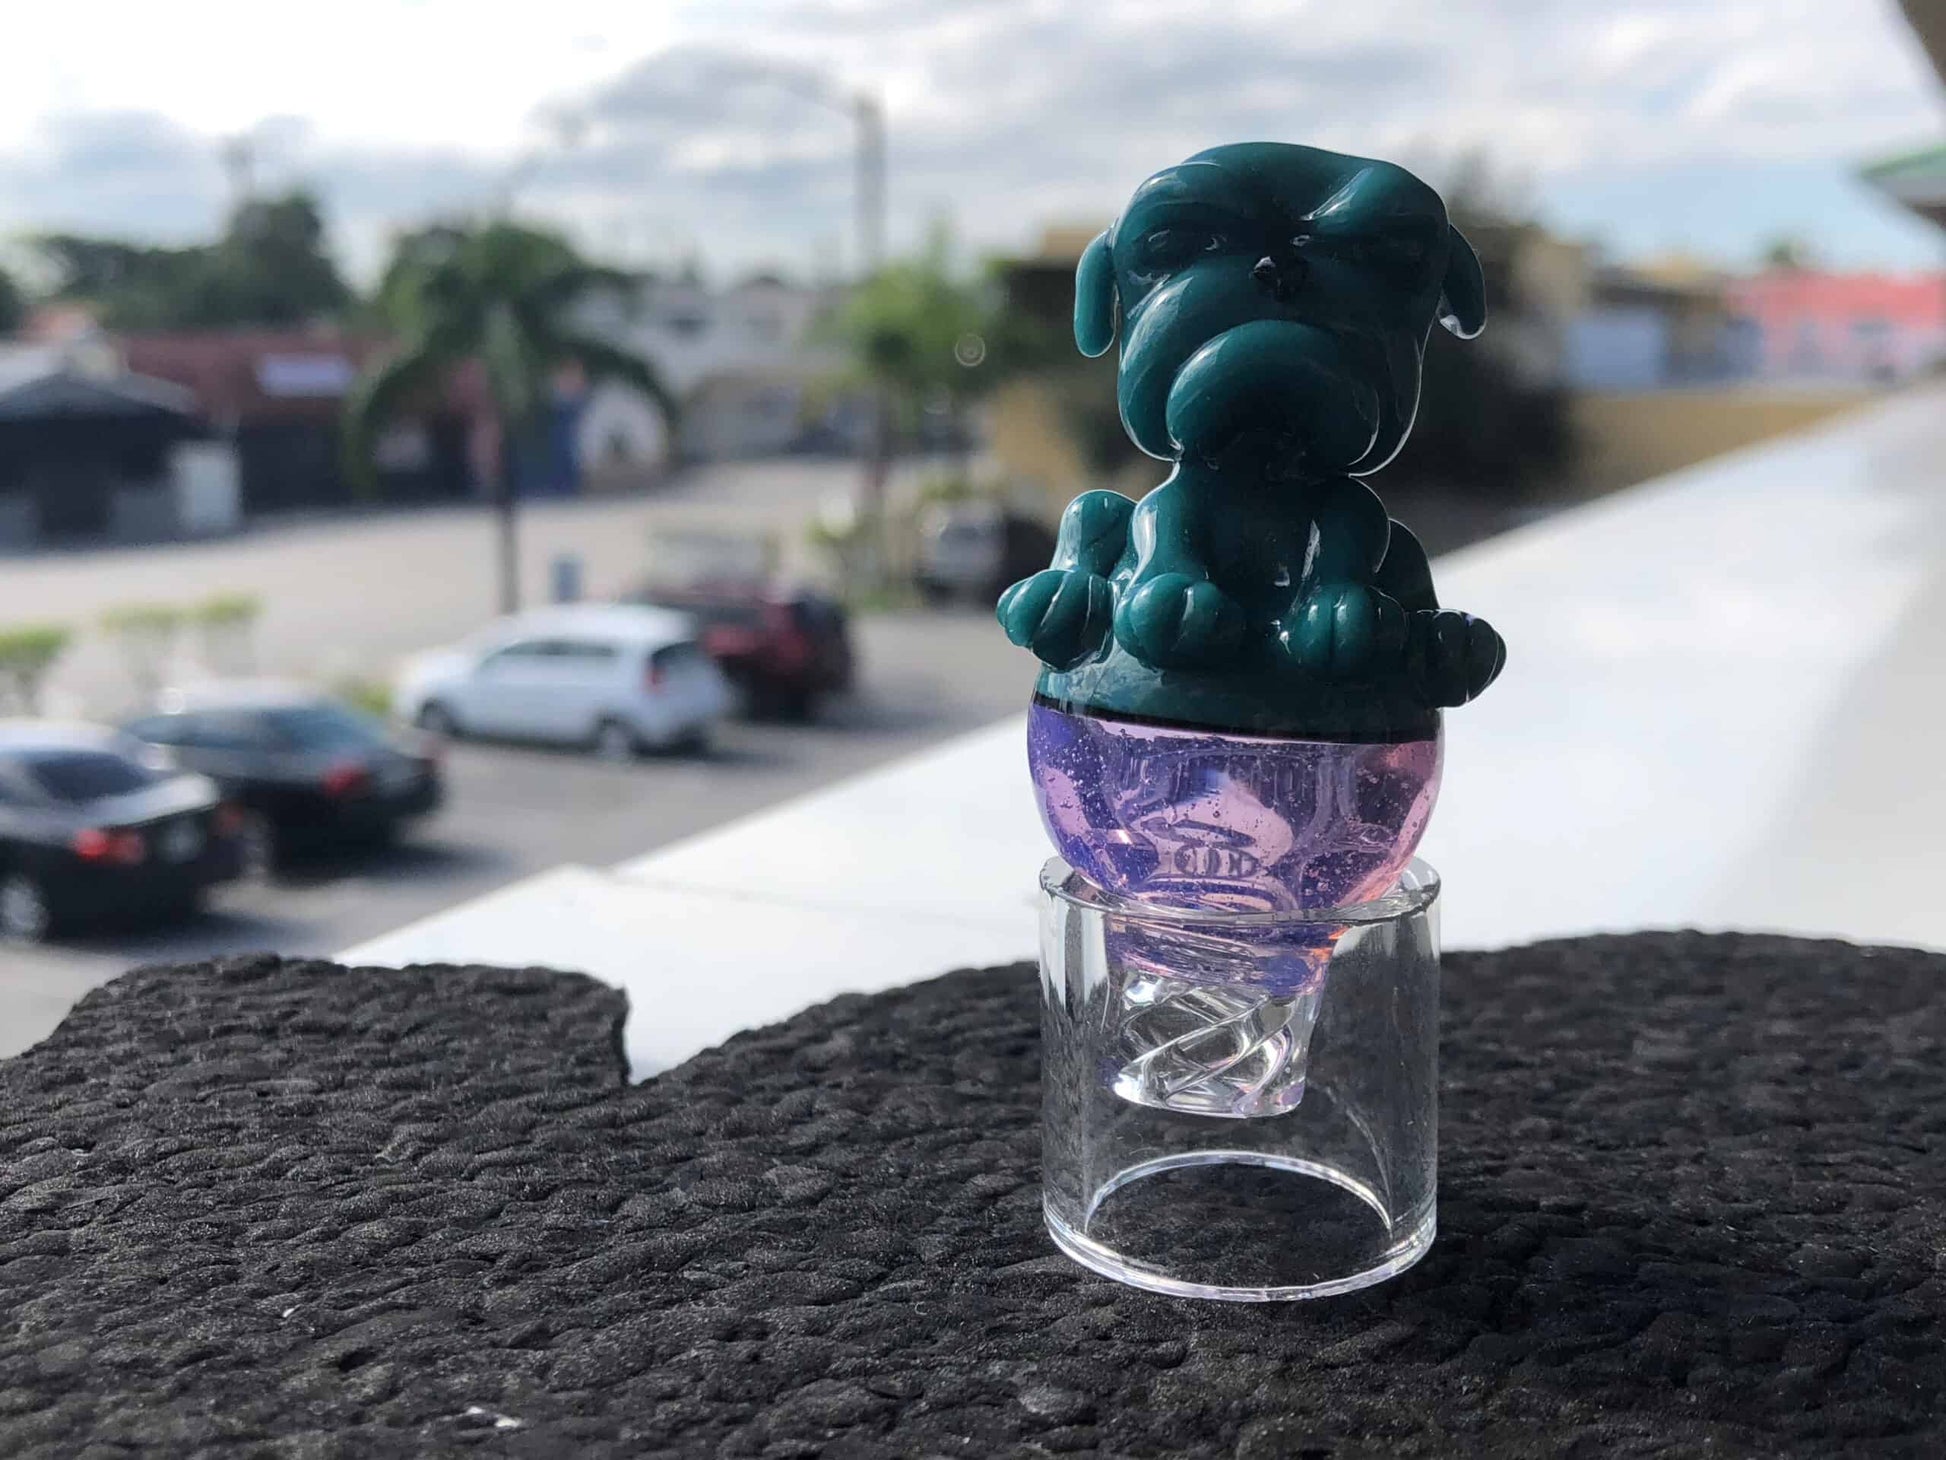 trendy design of the Aqua/Purple Bullie Spinner Carb Cap by Swanny